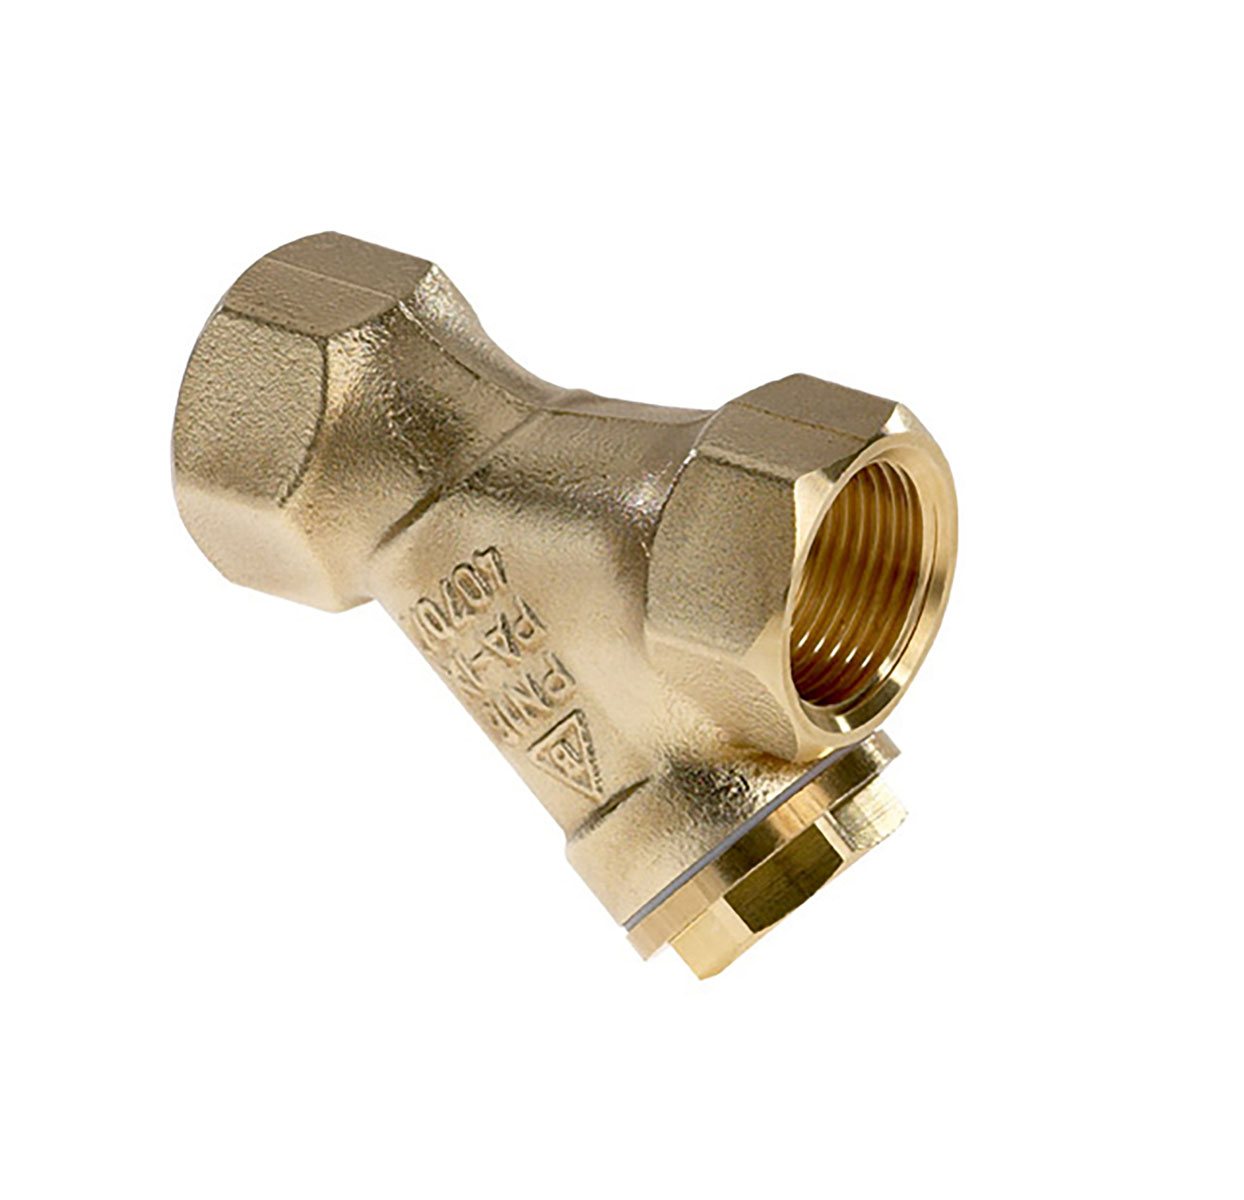 1450100 - CR-Brass Strainer Strainer with PTFE-sealing (Teflon)